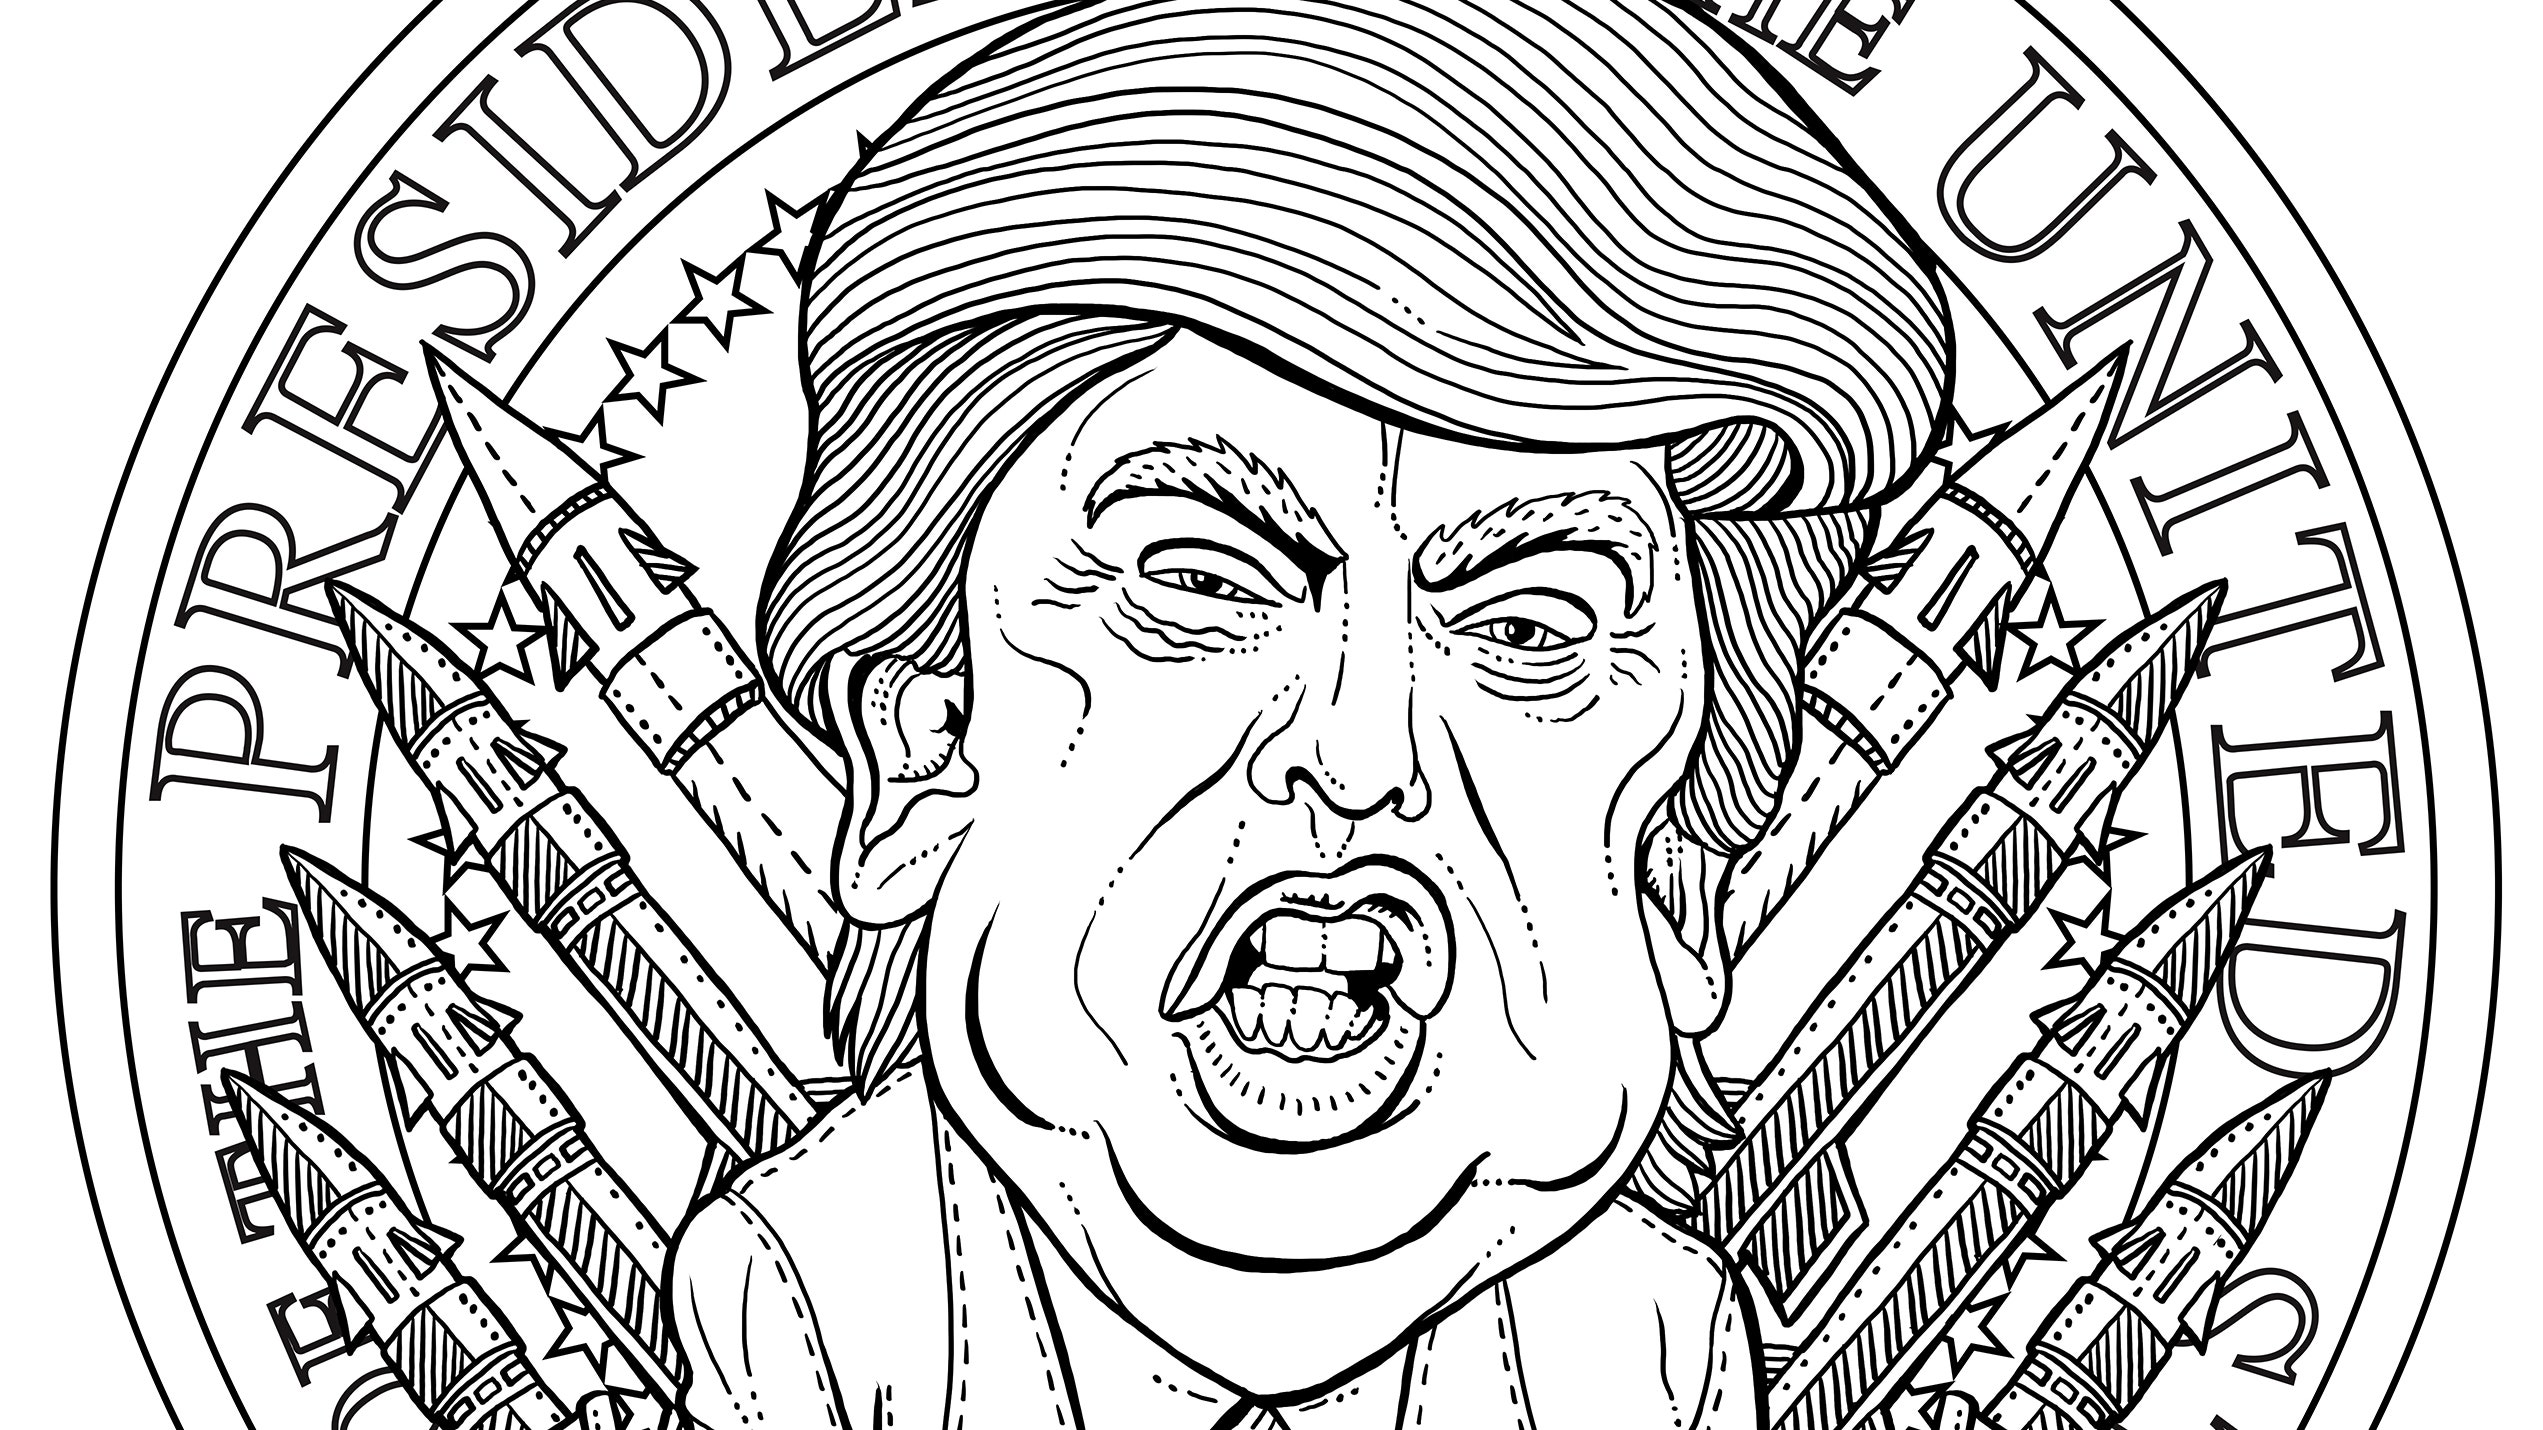 The most terrifying adult coloring book page imagineable